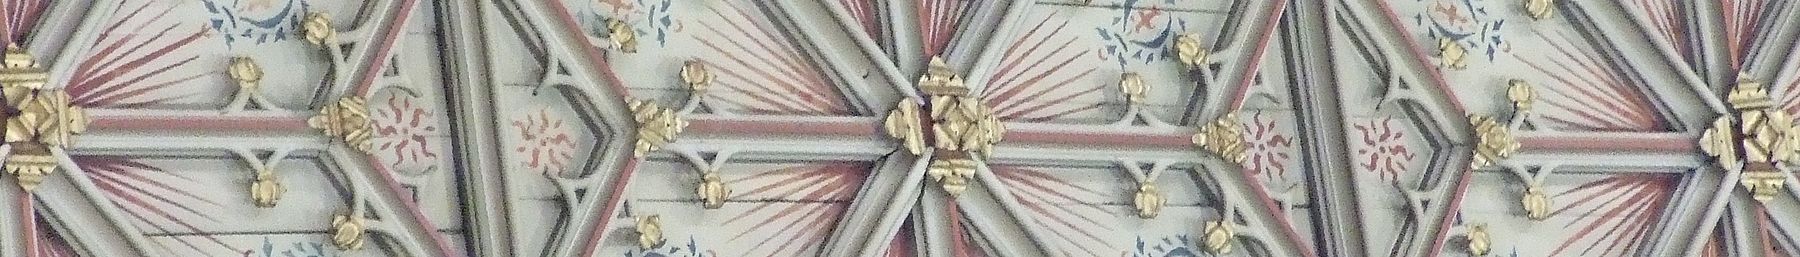 Canterbury banner Cathedral Ceiling.JPG